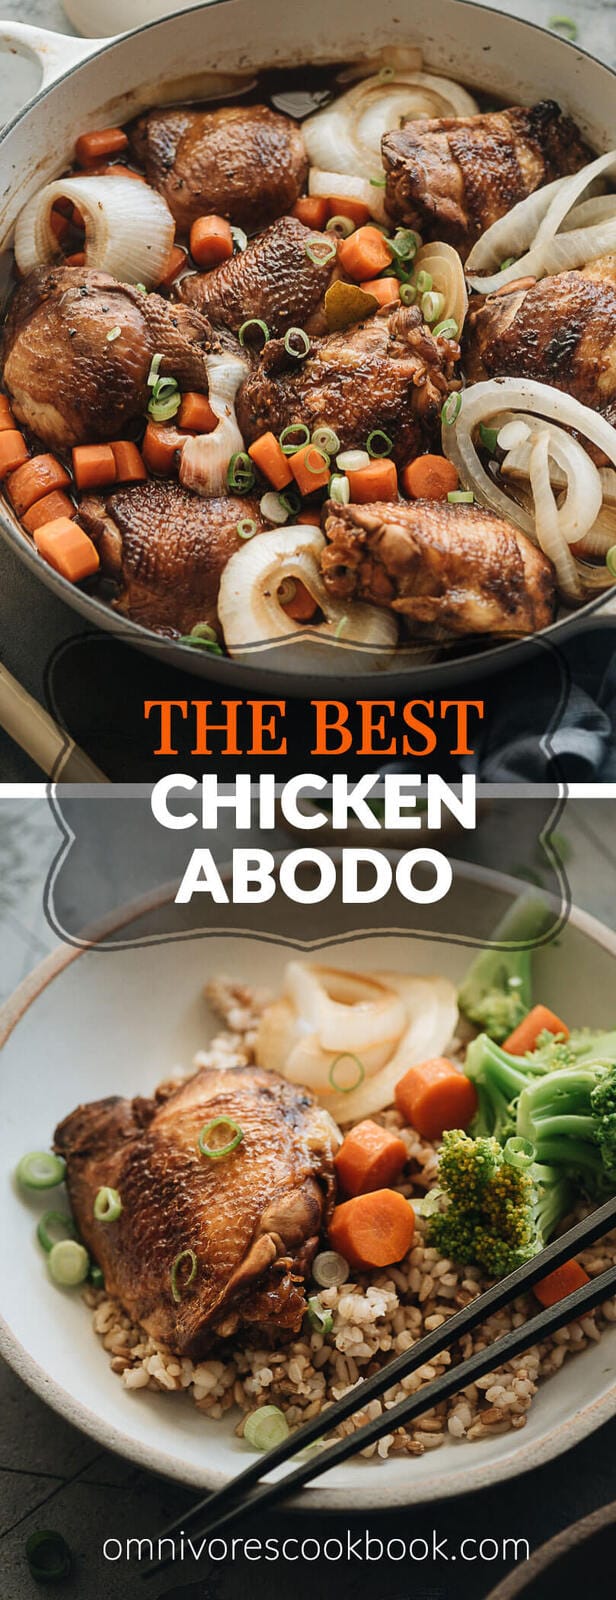 The Best Filipino Chicken Adobo - This savory yet tangy chicken dish only requires a few ingredients and lets the marinade do all the work for a flavorful and easy weekday dinner you can make in your own kitchen. {Gluten-Free} #easy #recipe #stovetop #authentic #thighs #vegetables